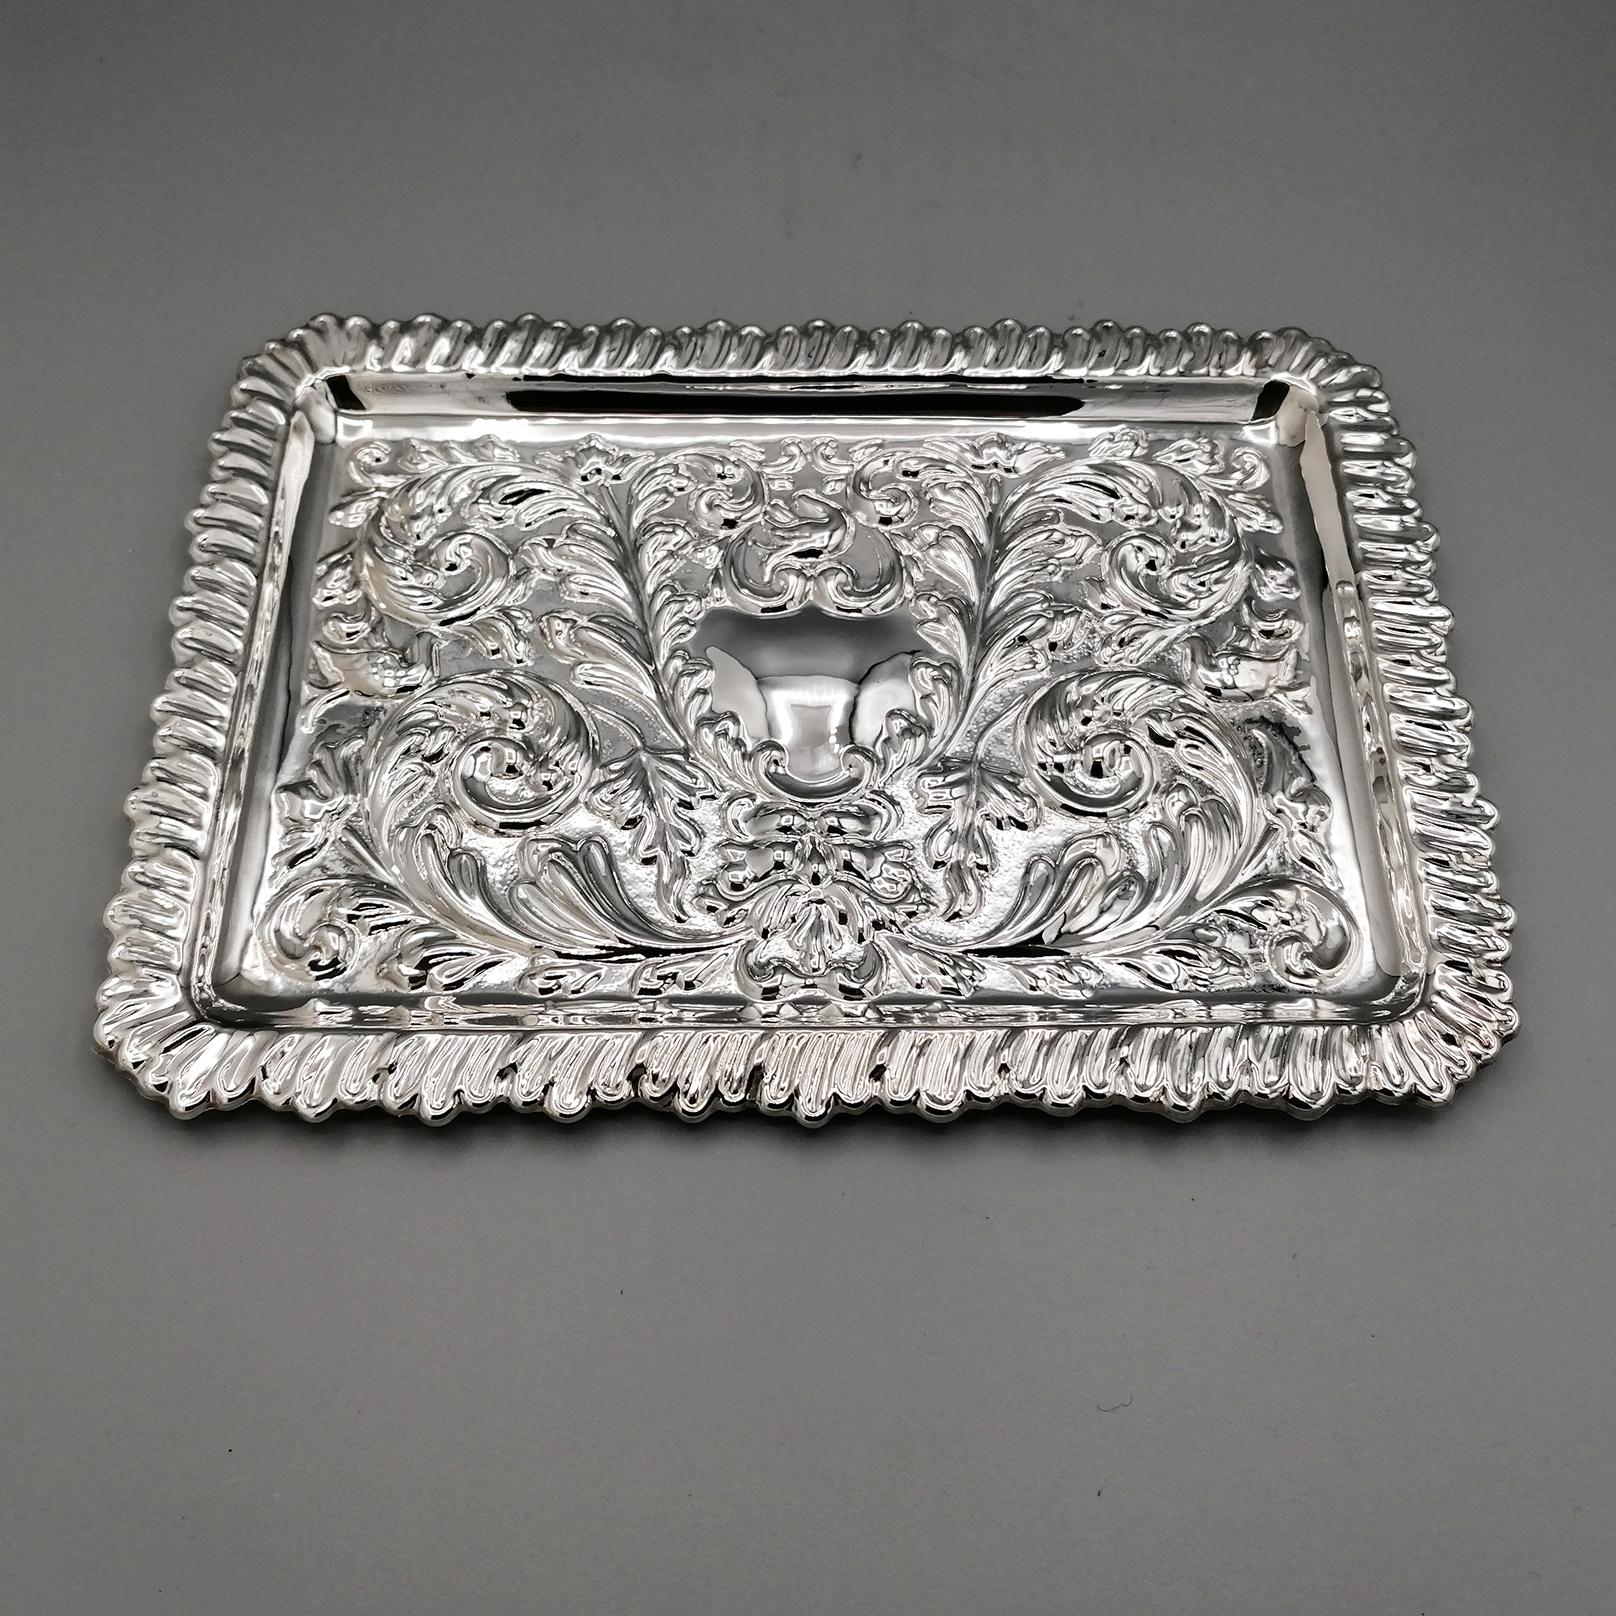 Letter tray in sterling silver
Rectangular tray for correspondence, reproduction of specimens in silver very popular in the late Victorian era.
The scrolls design covers the entire bottom of the tray, leaving space in the central part for a shaped